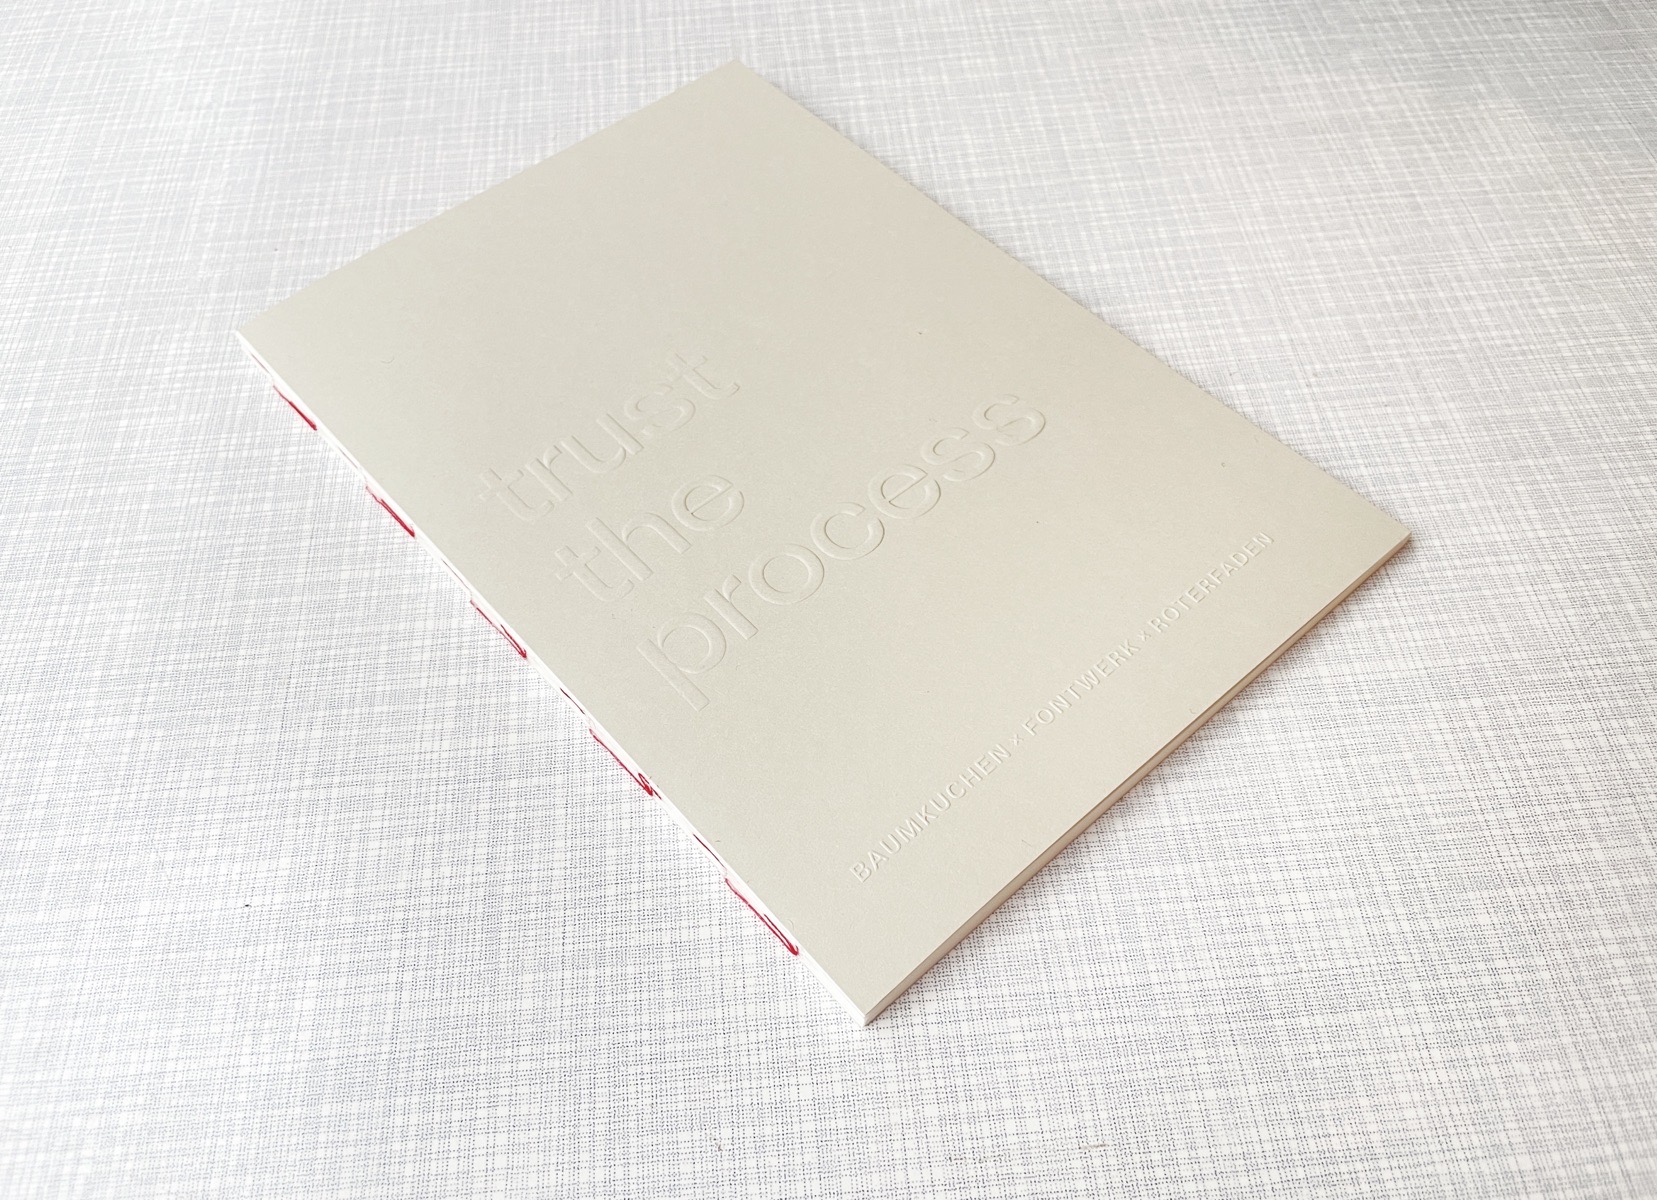 Roterfaden Limited special edition of the Dot Grid Notebook A5 in collaboration with BAUMKUCHEN STUDIO and FONTWERK. Perfect for notes, planning, studying, drawings, travel, and sketches.